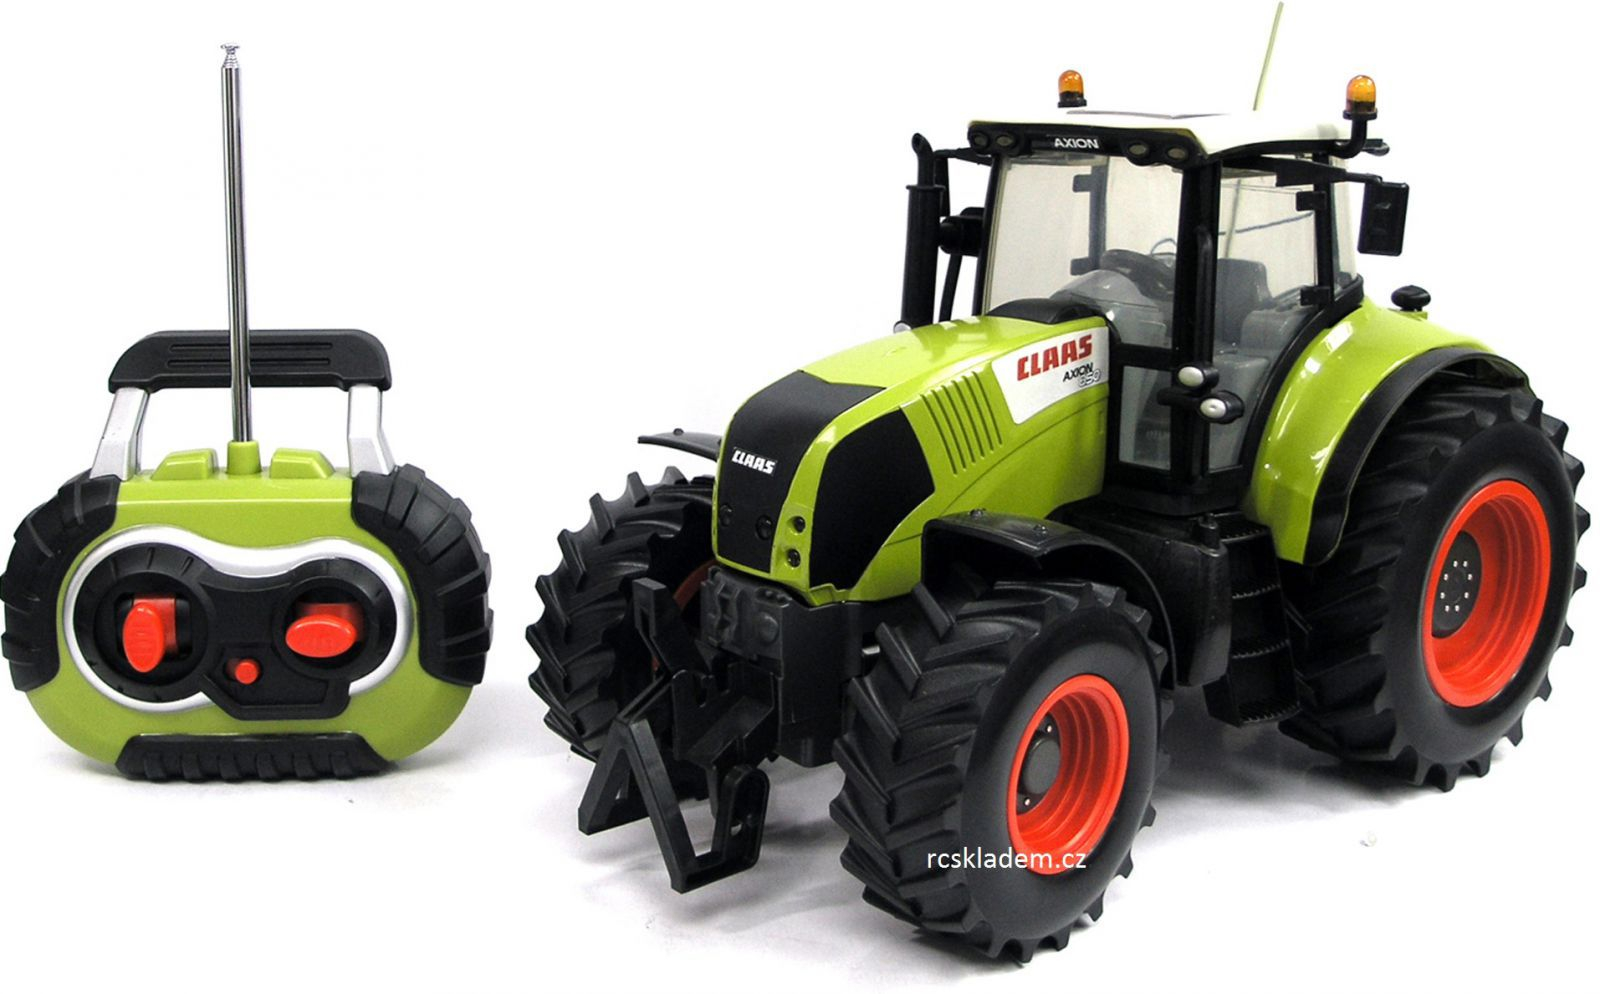 RC Tractor AXION CLAAS 850 RTR 1:16 23102990 green